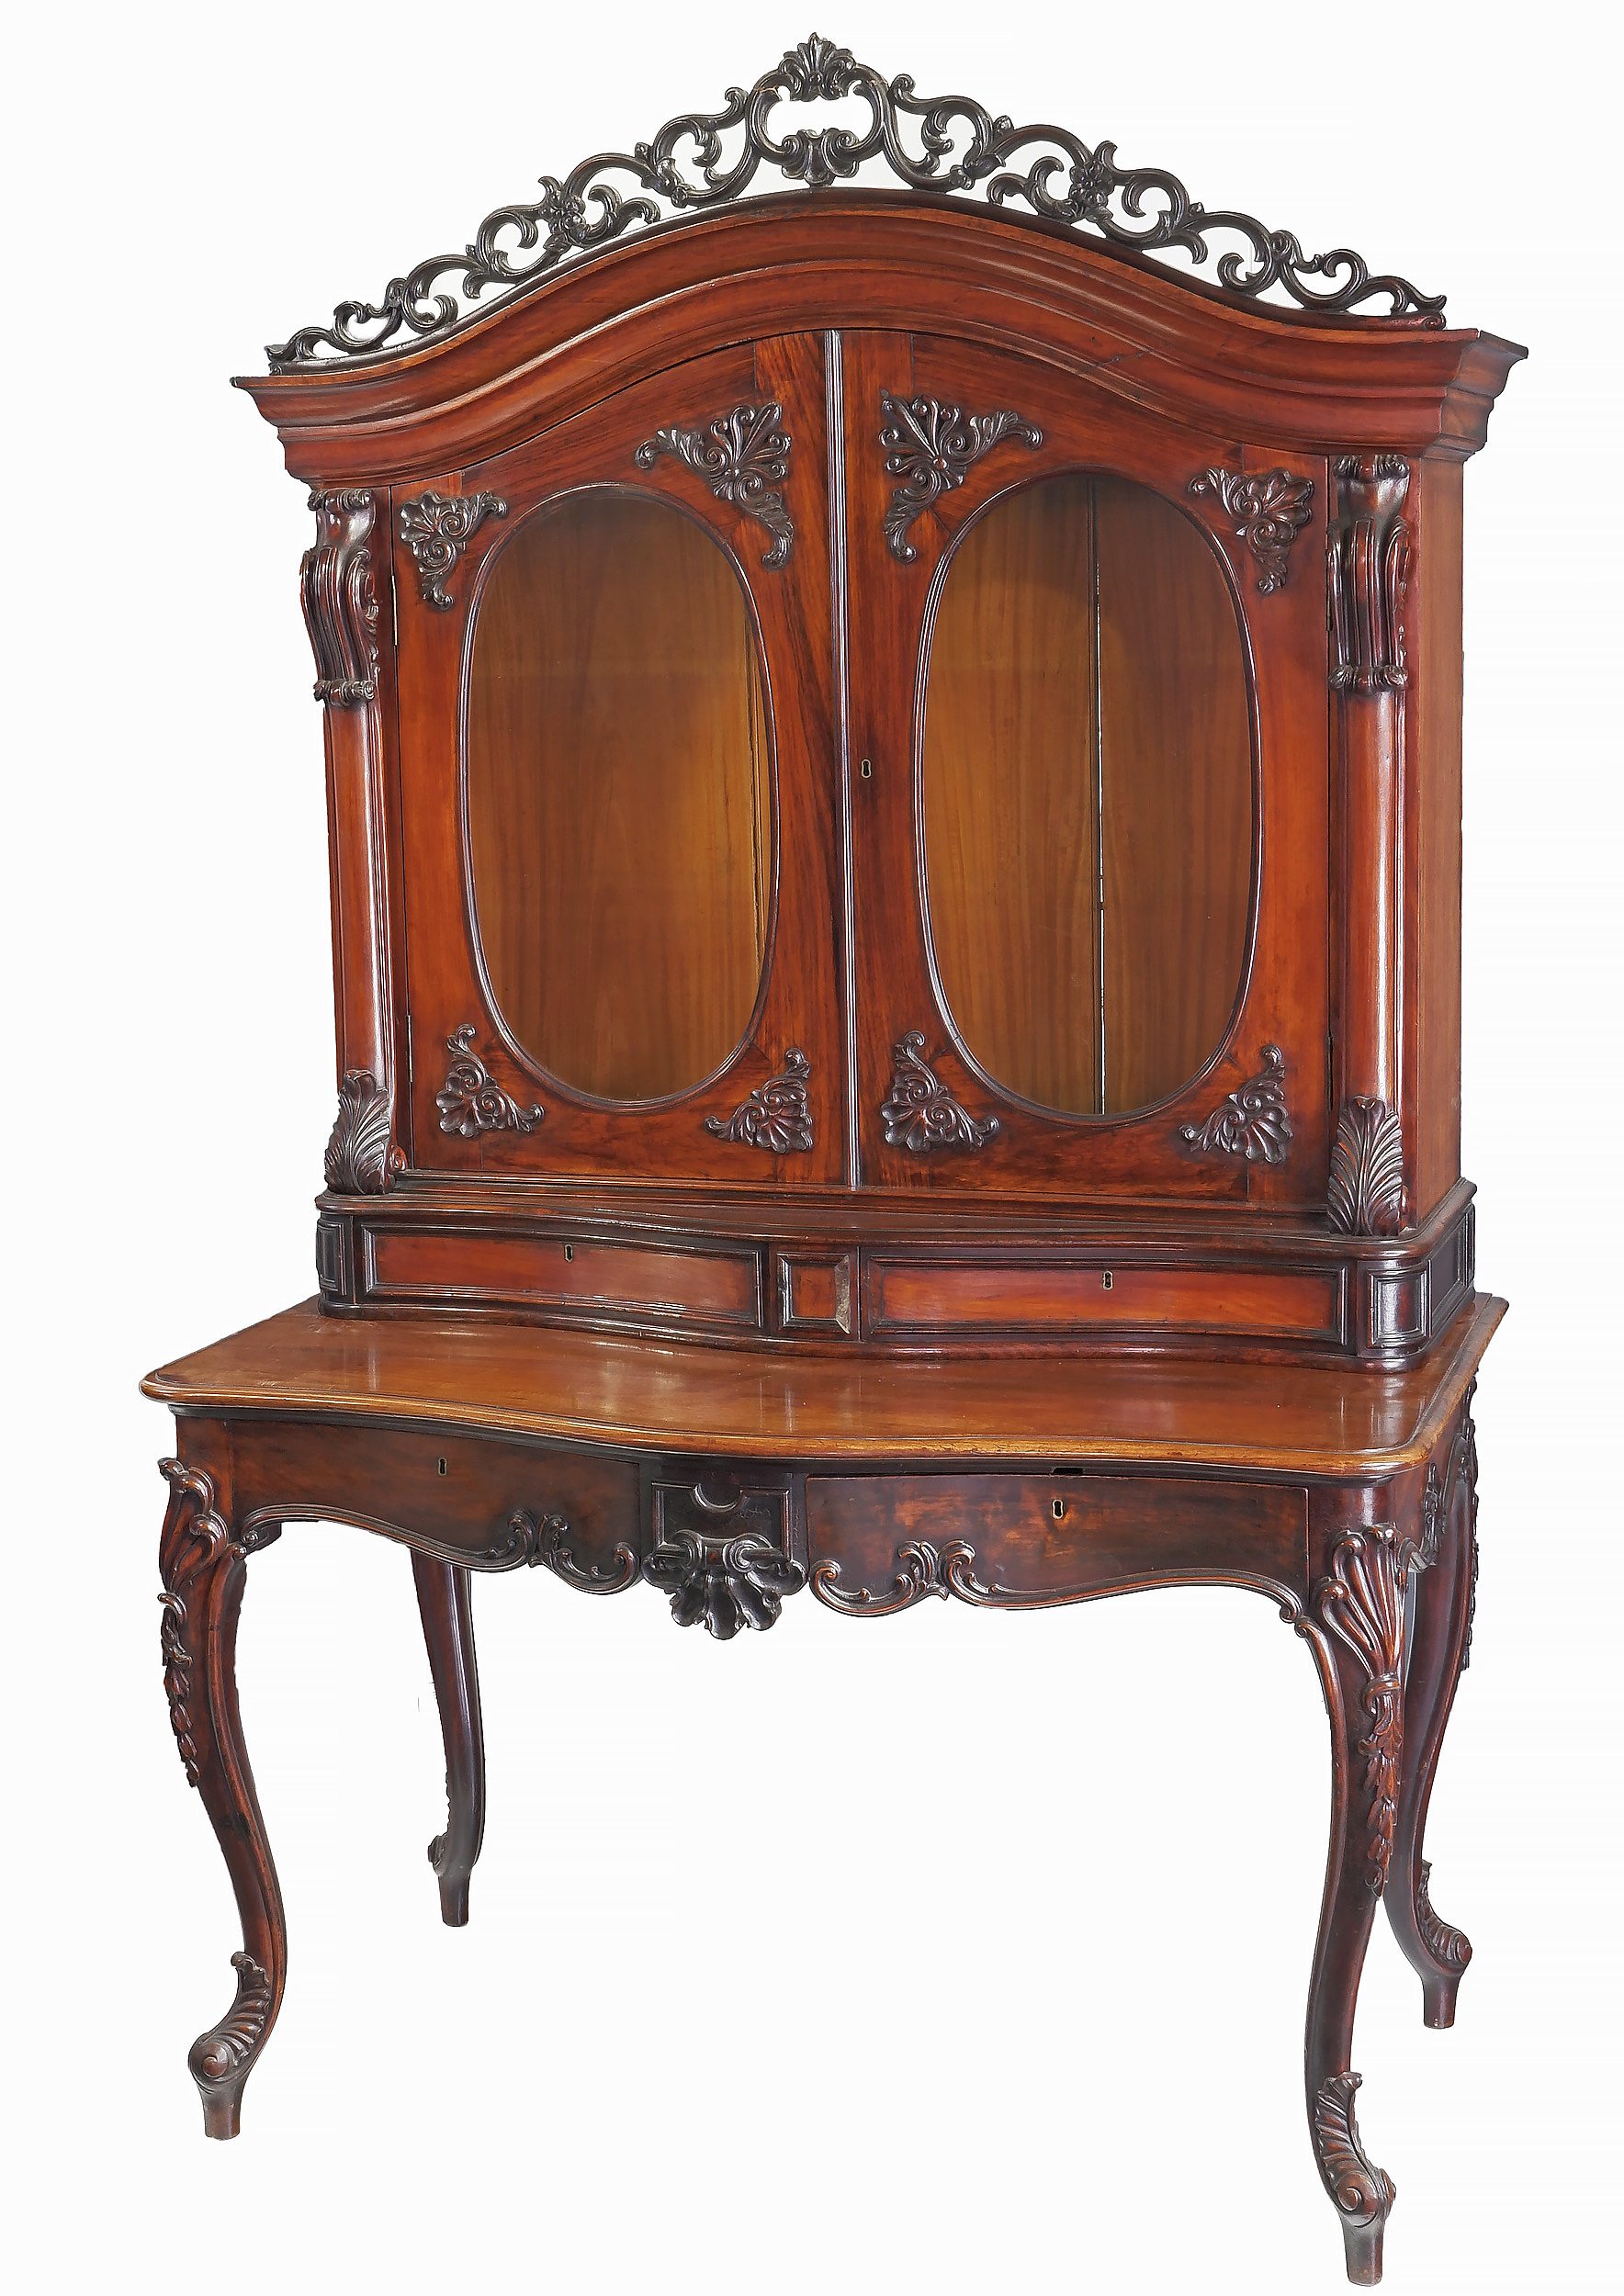 'Good Late 19th Century Italian Rosewood Cabinet with Fine Carving in the Baroque Manner'